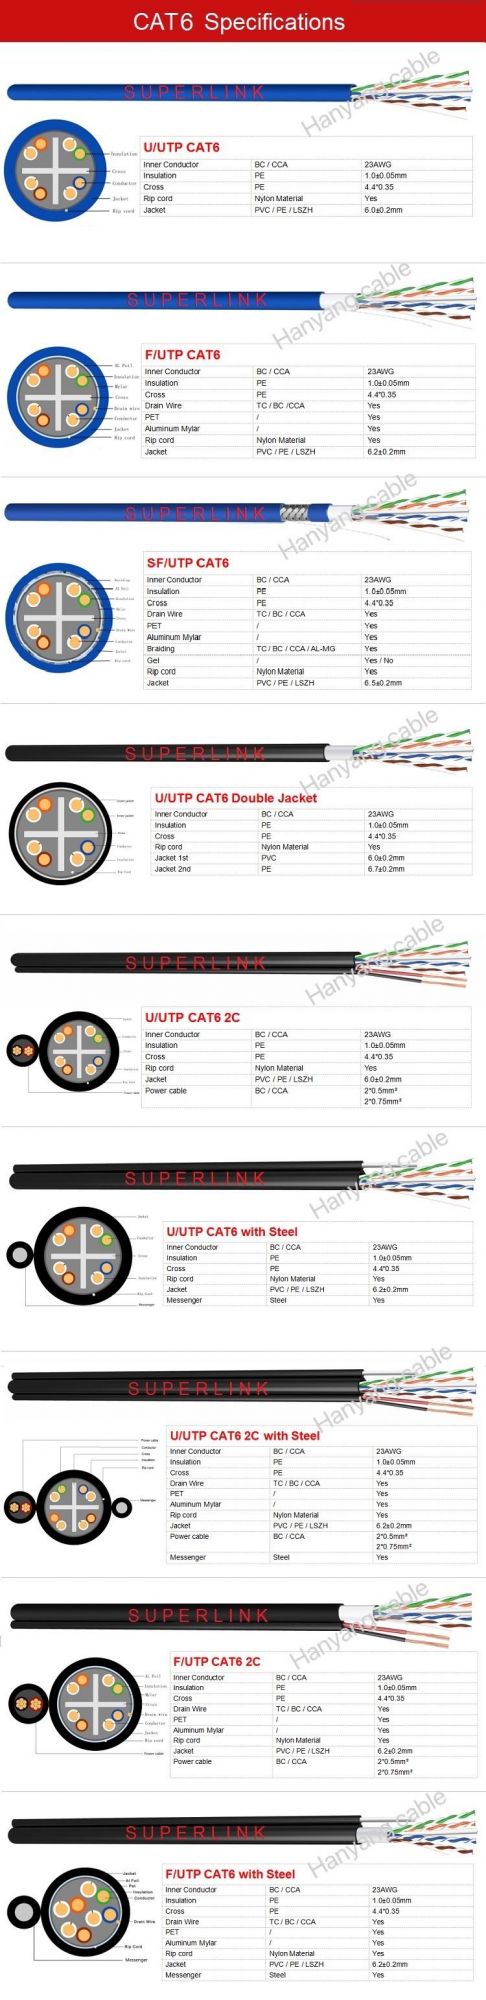 Camera Cable Cat5e CAT6 CAT6A Cat7 with Power Cable Jacket PVC Data Cable Outdoor U L 23AWG LAN Cable Network Computer Cable